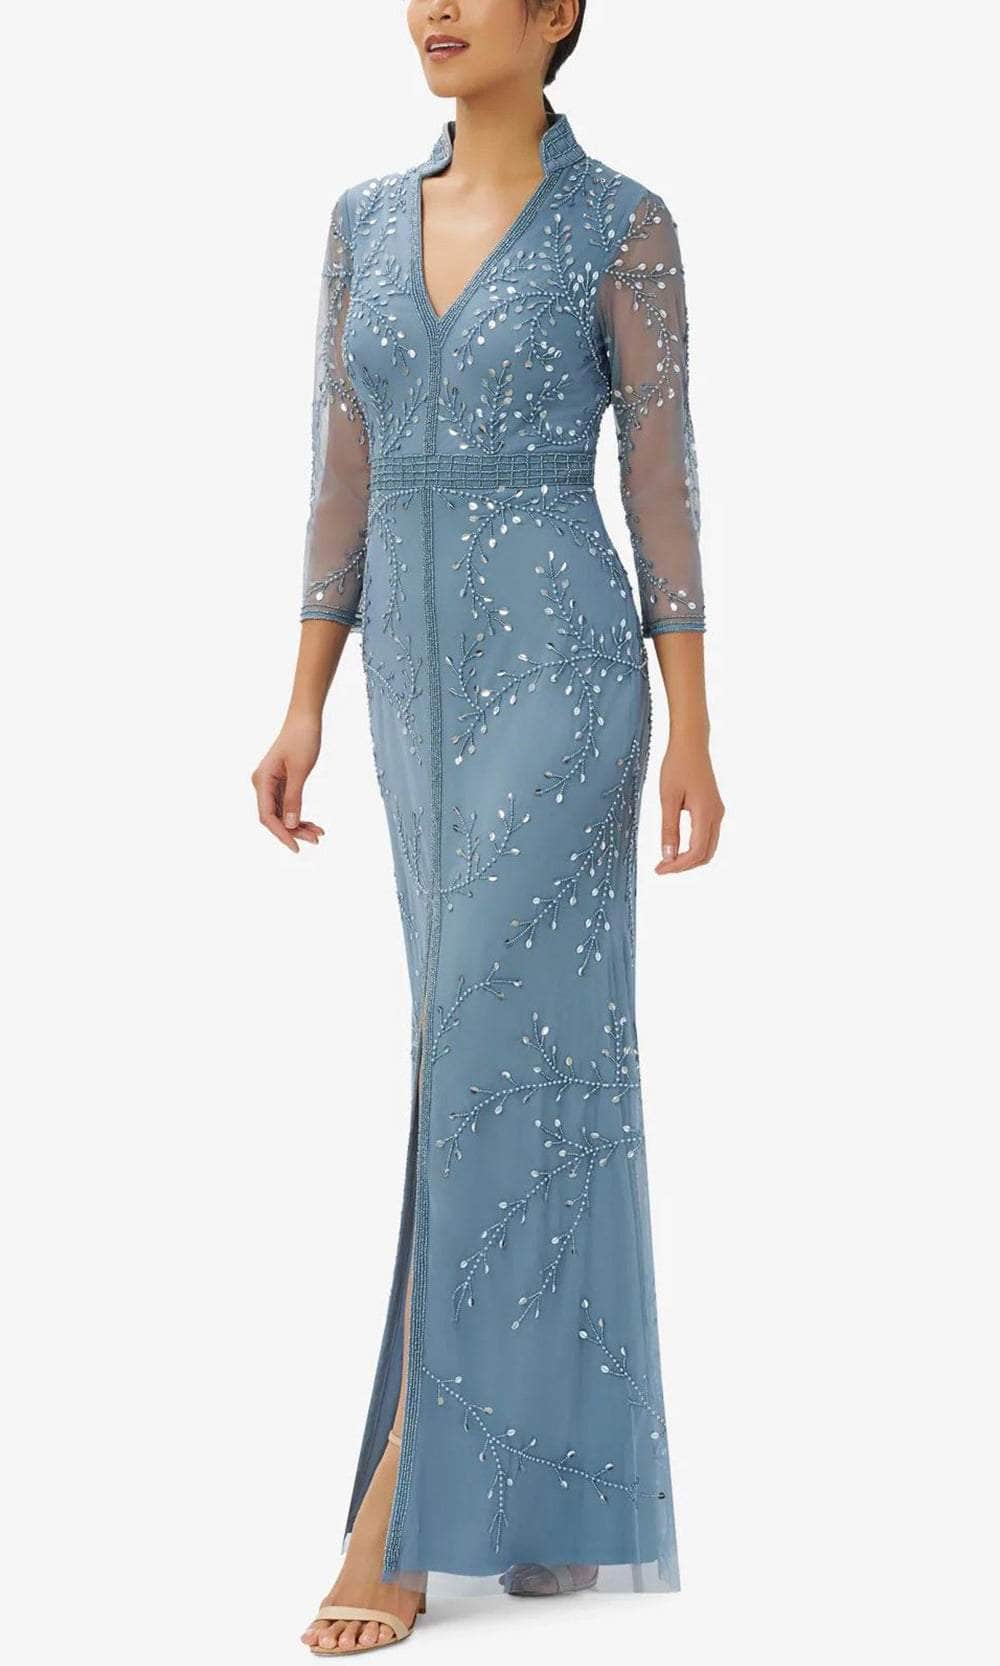 Image of Adrianna Papell AP1E209946 P - Beaded Quarter Sleeve Evening Gown